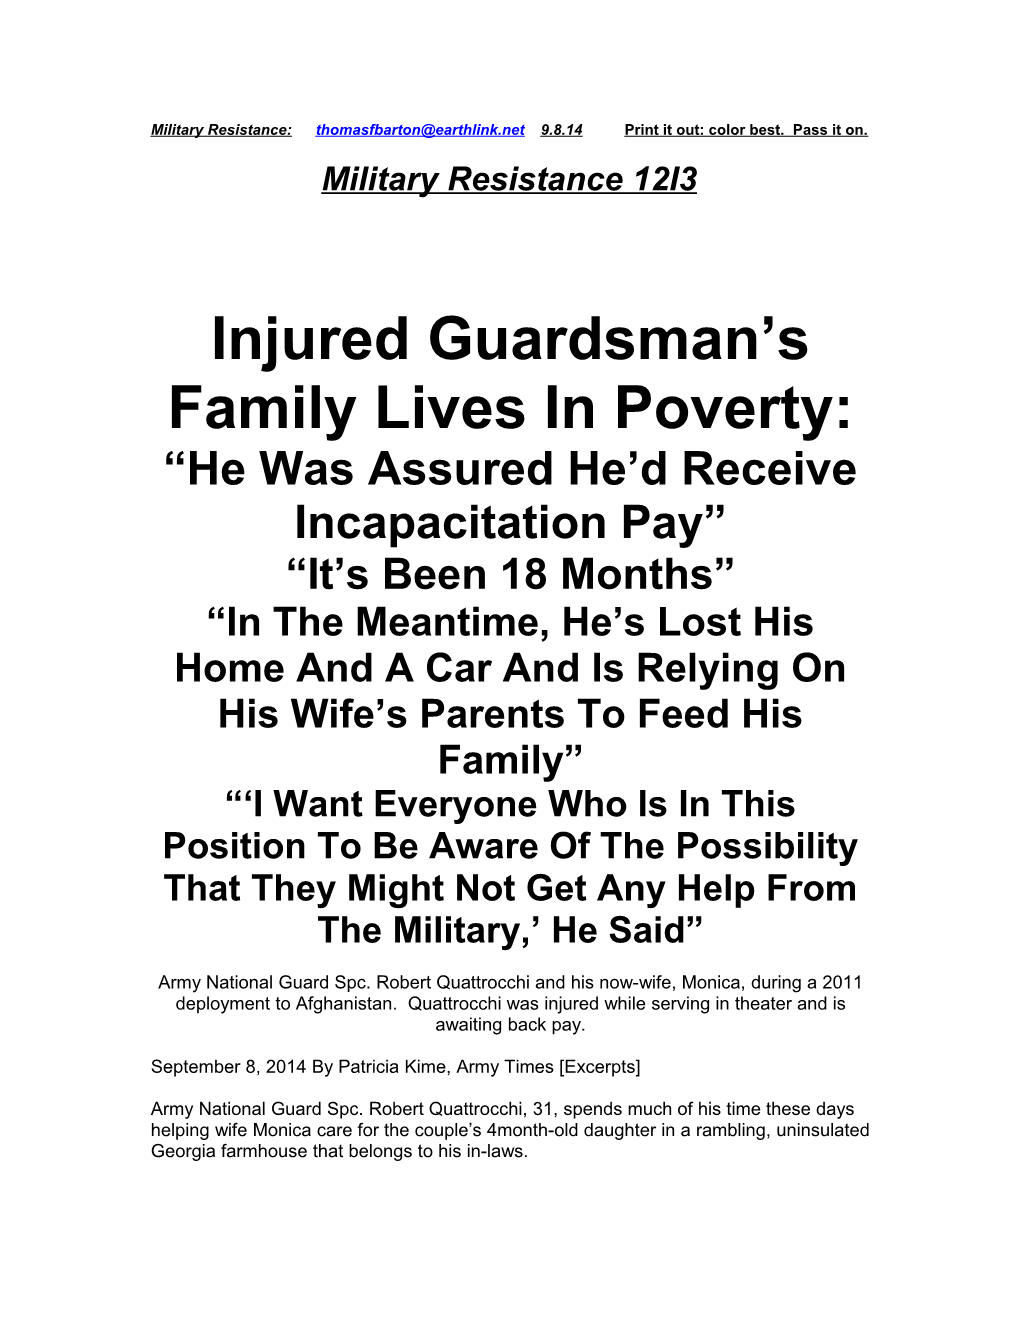 Injured Guardsman S Family Lives in Poverty